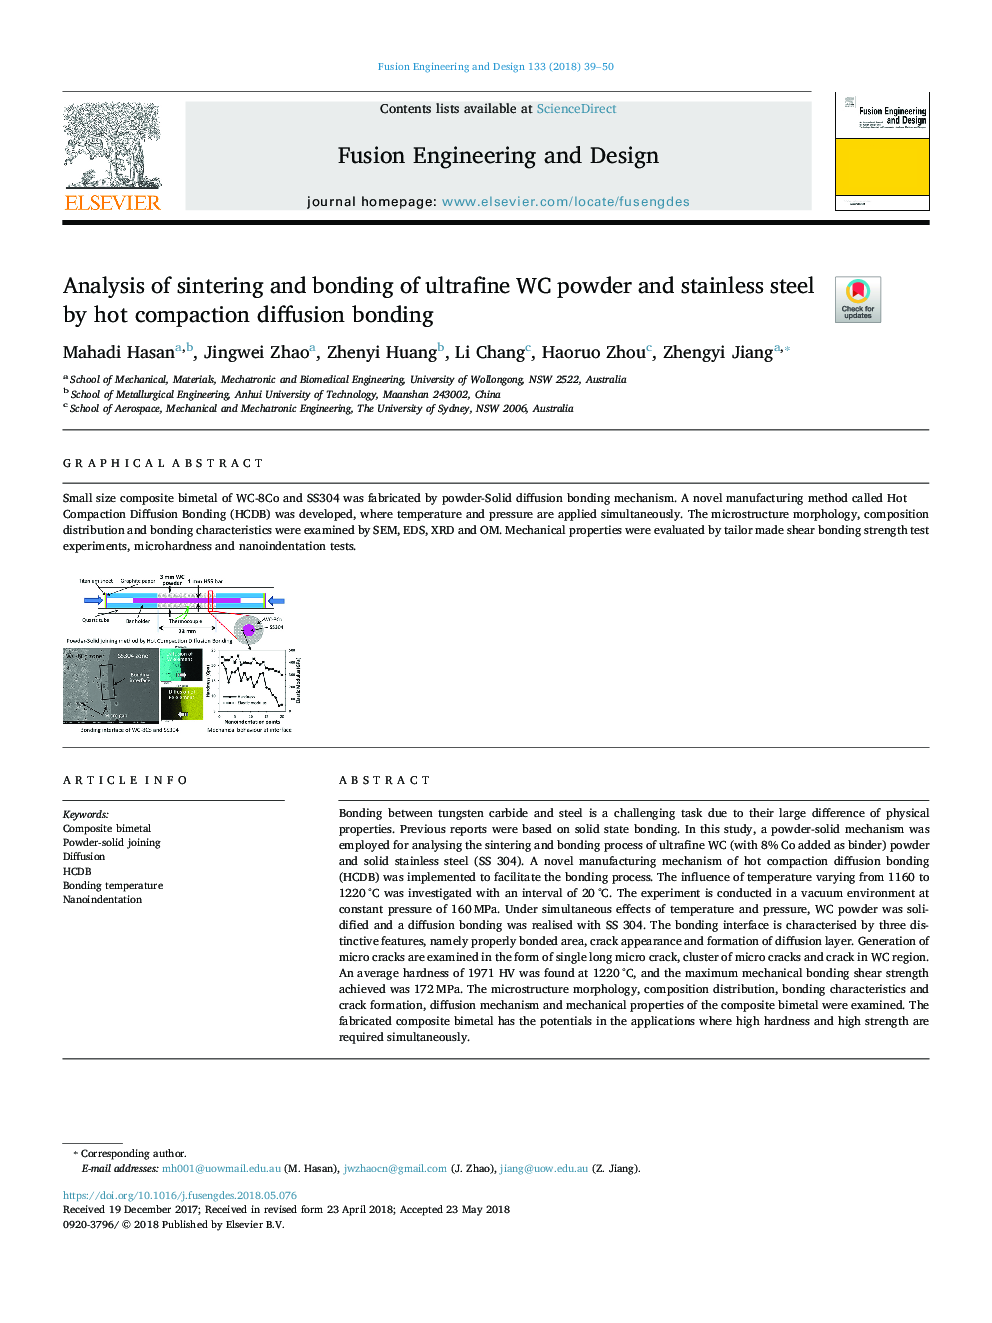 Analysis of sintering and bonding of ultrafine WC powder and stainless steel by hot compaction diffusion bonding